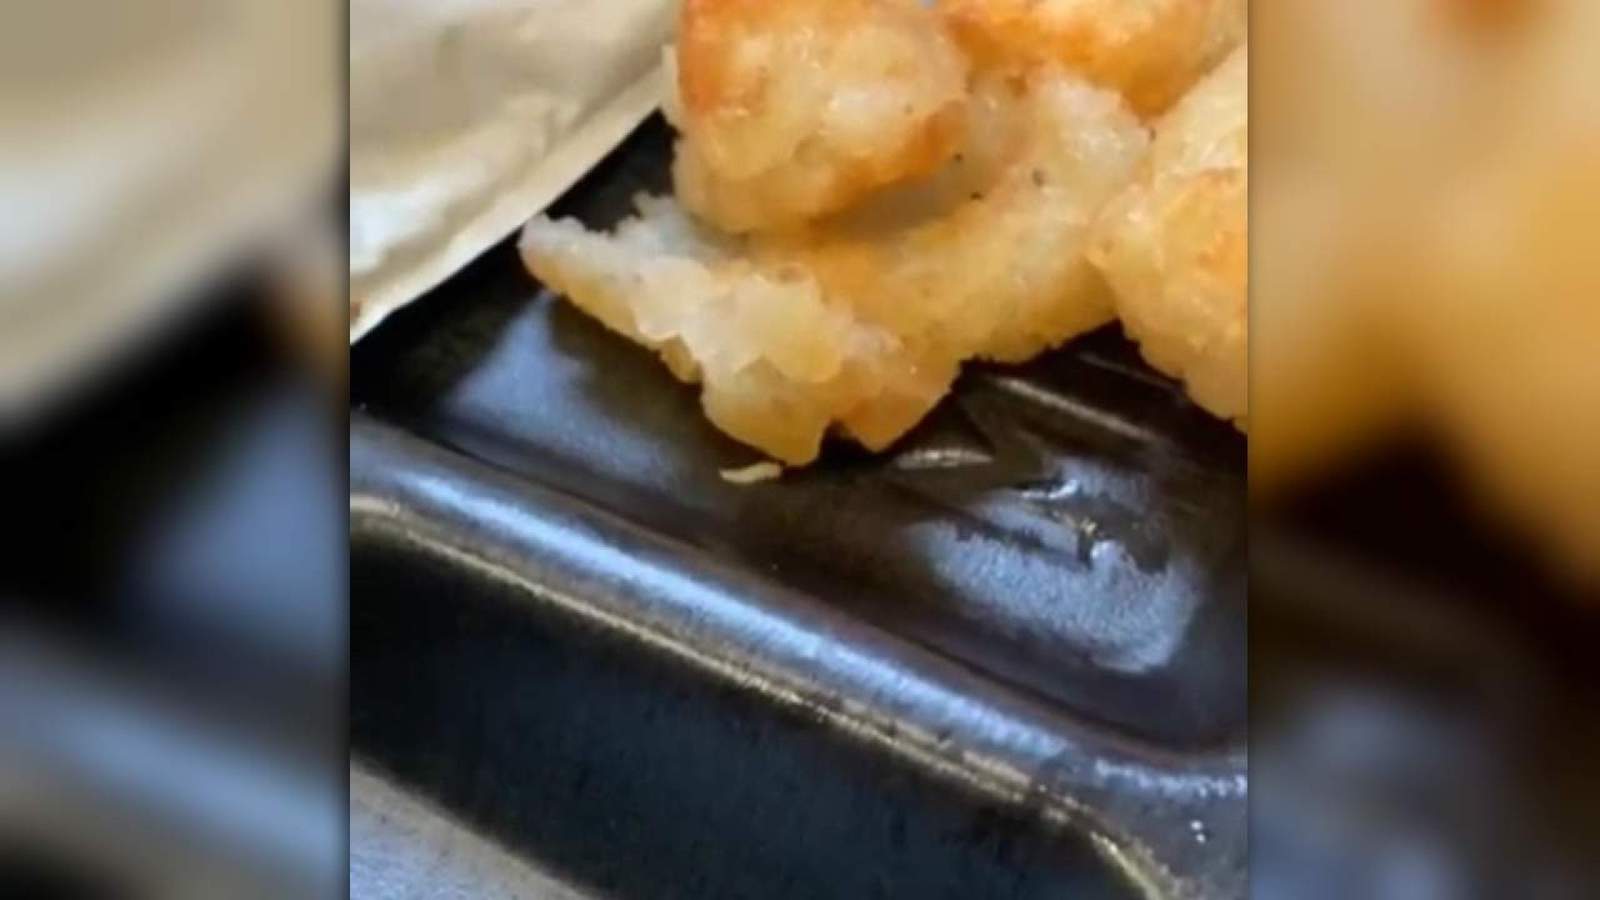 Middleburg High students revolted by maggots found in school lunches